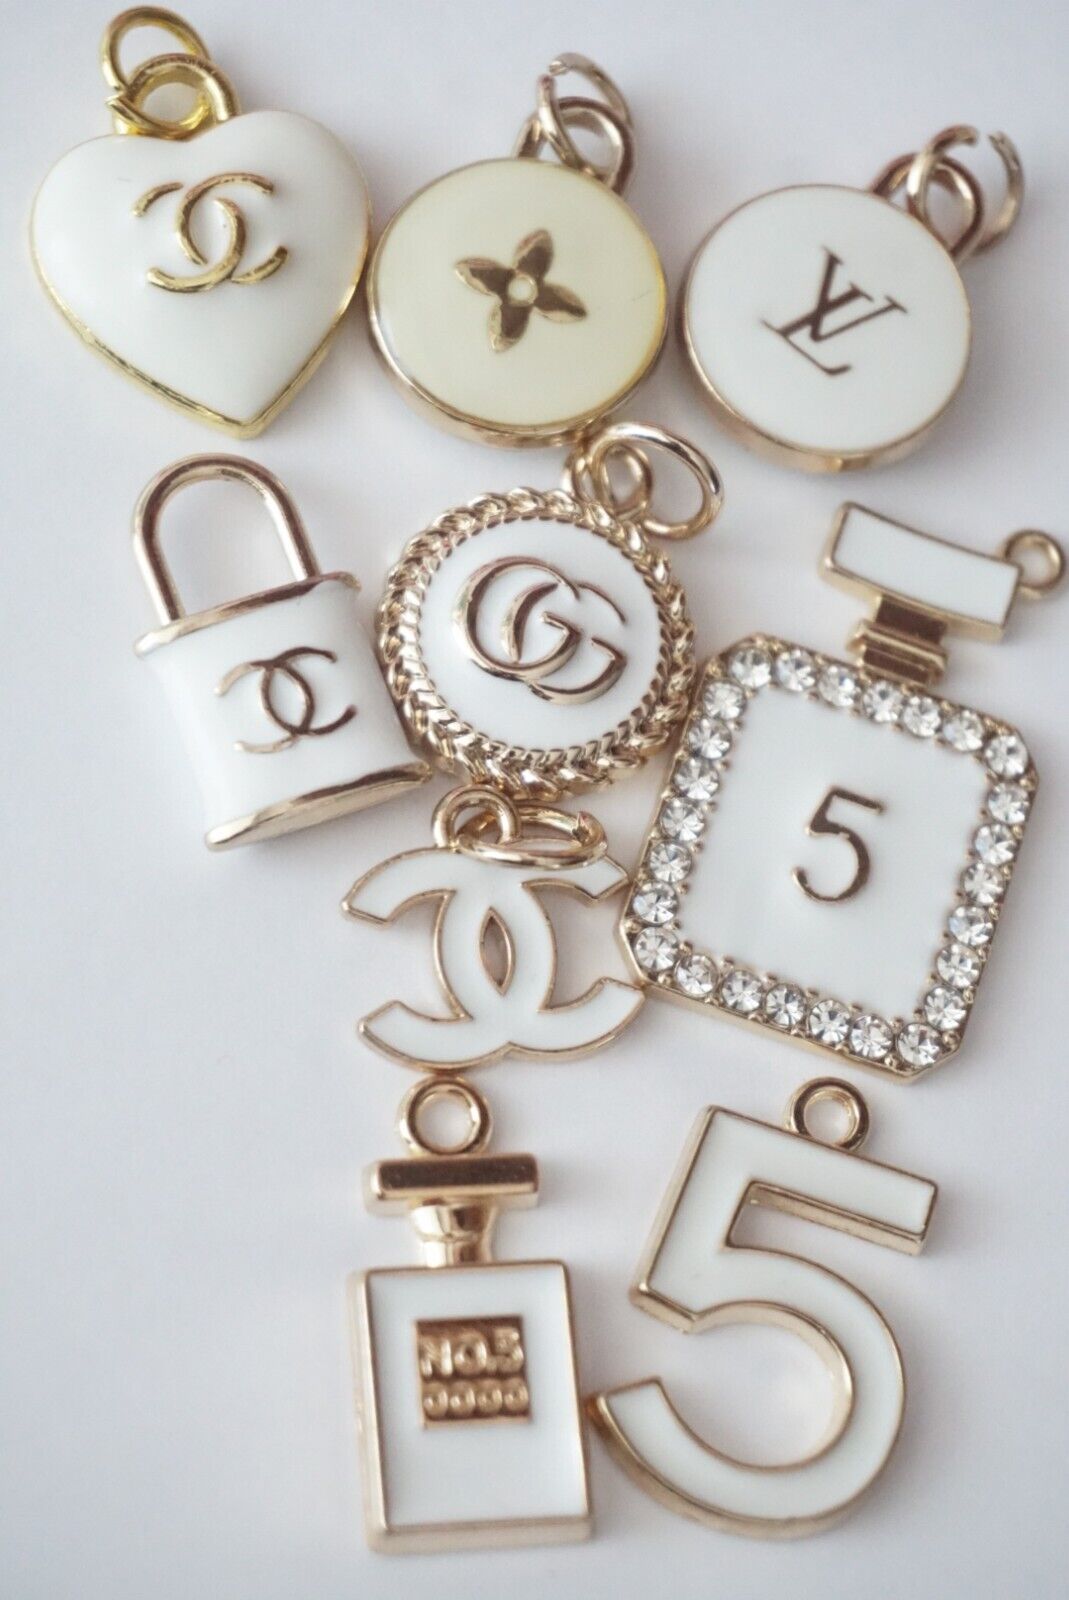 Gucci   Zipper Pull mix lot of 9 mix white & gold  charms